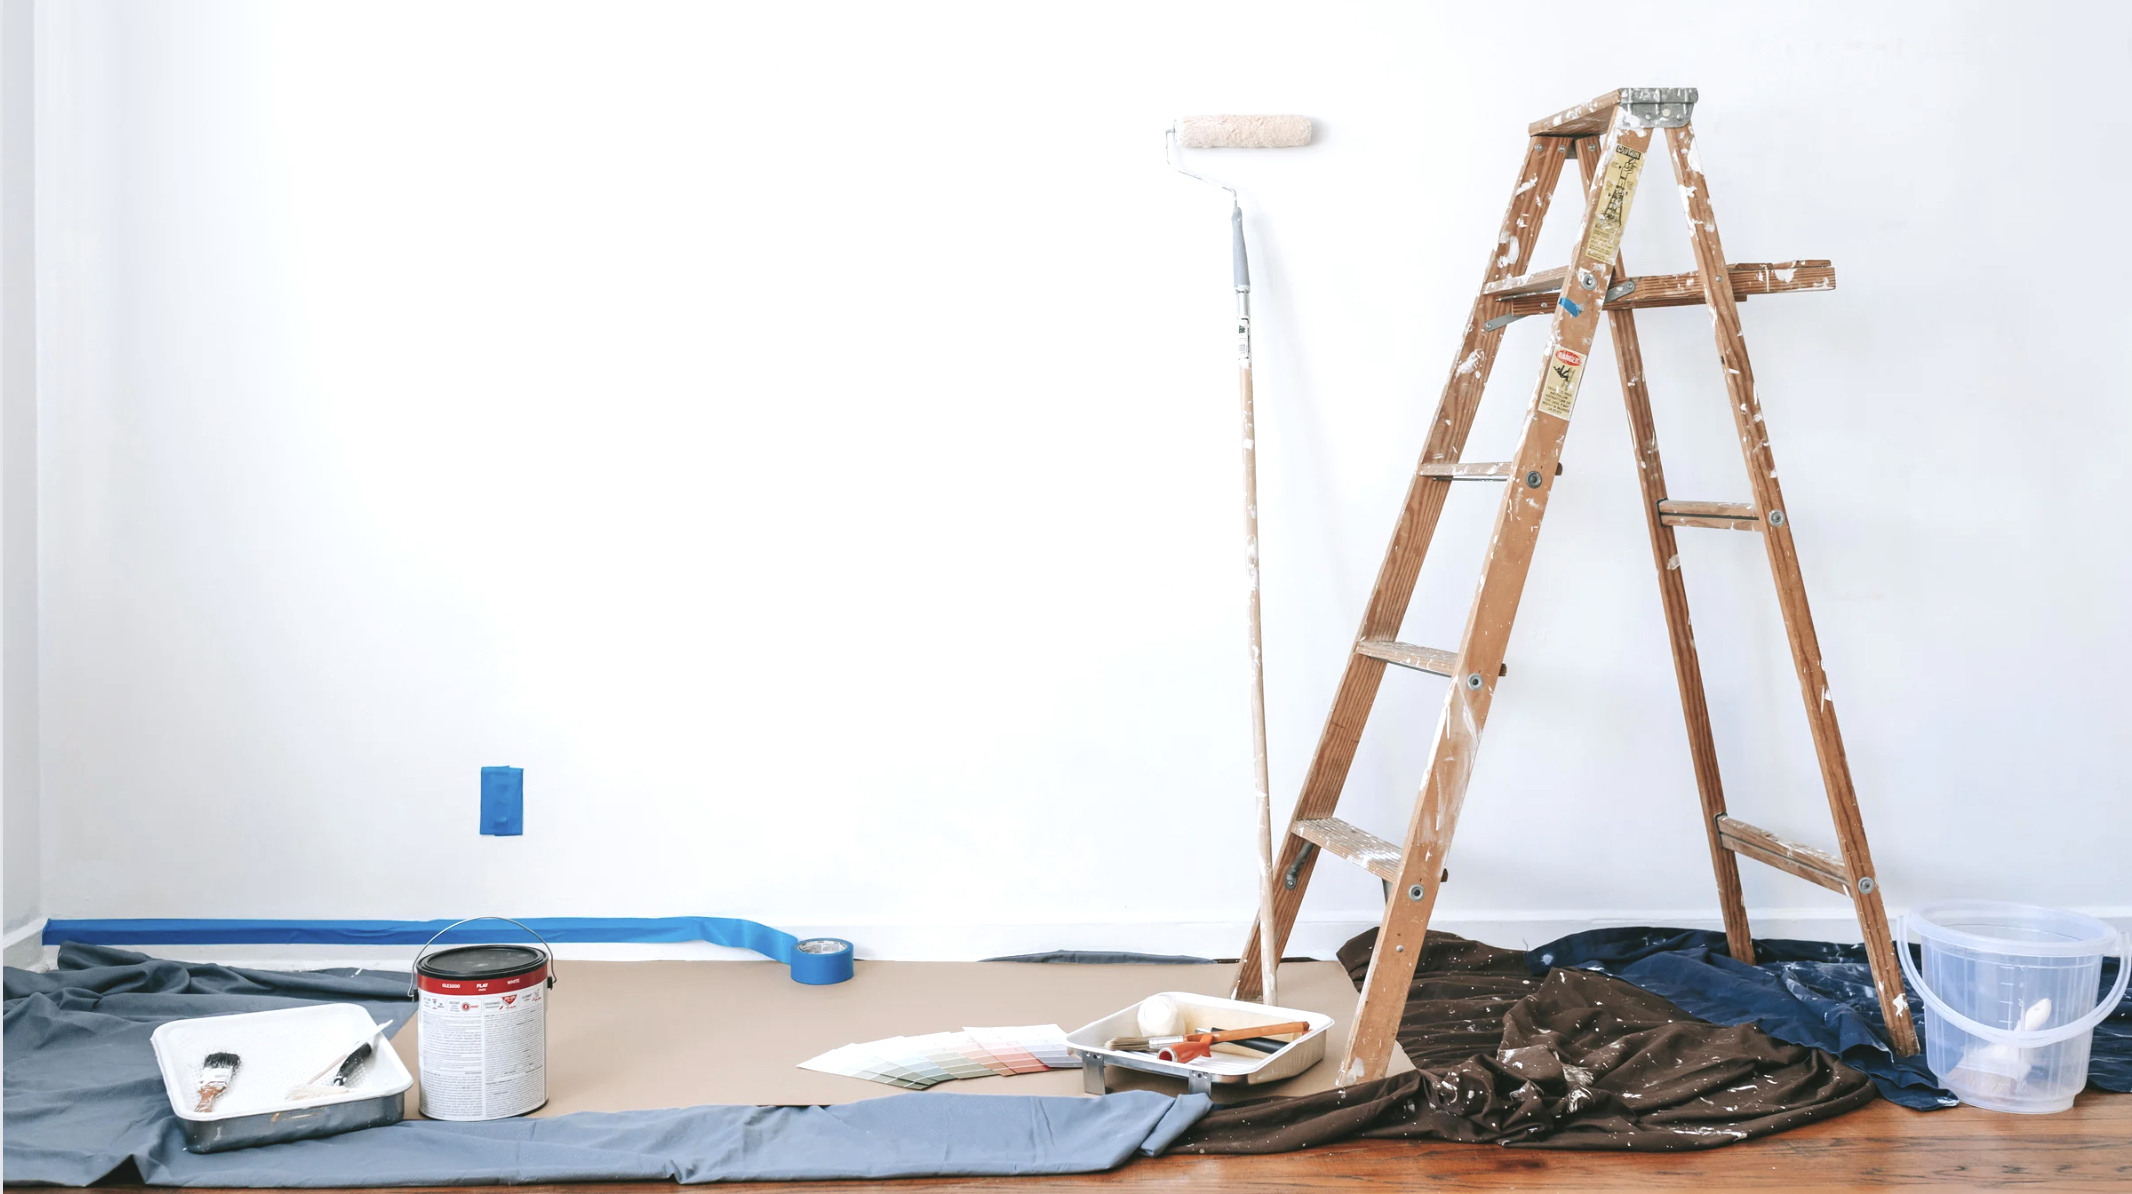 Budget-Friendly Home Improvement Projects - Hire a Dallas-Fort Worth Contractor